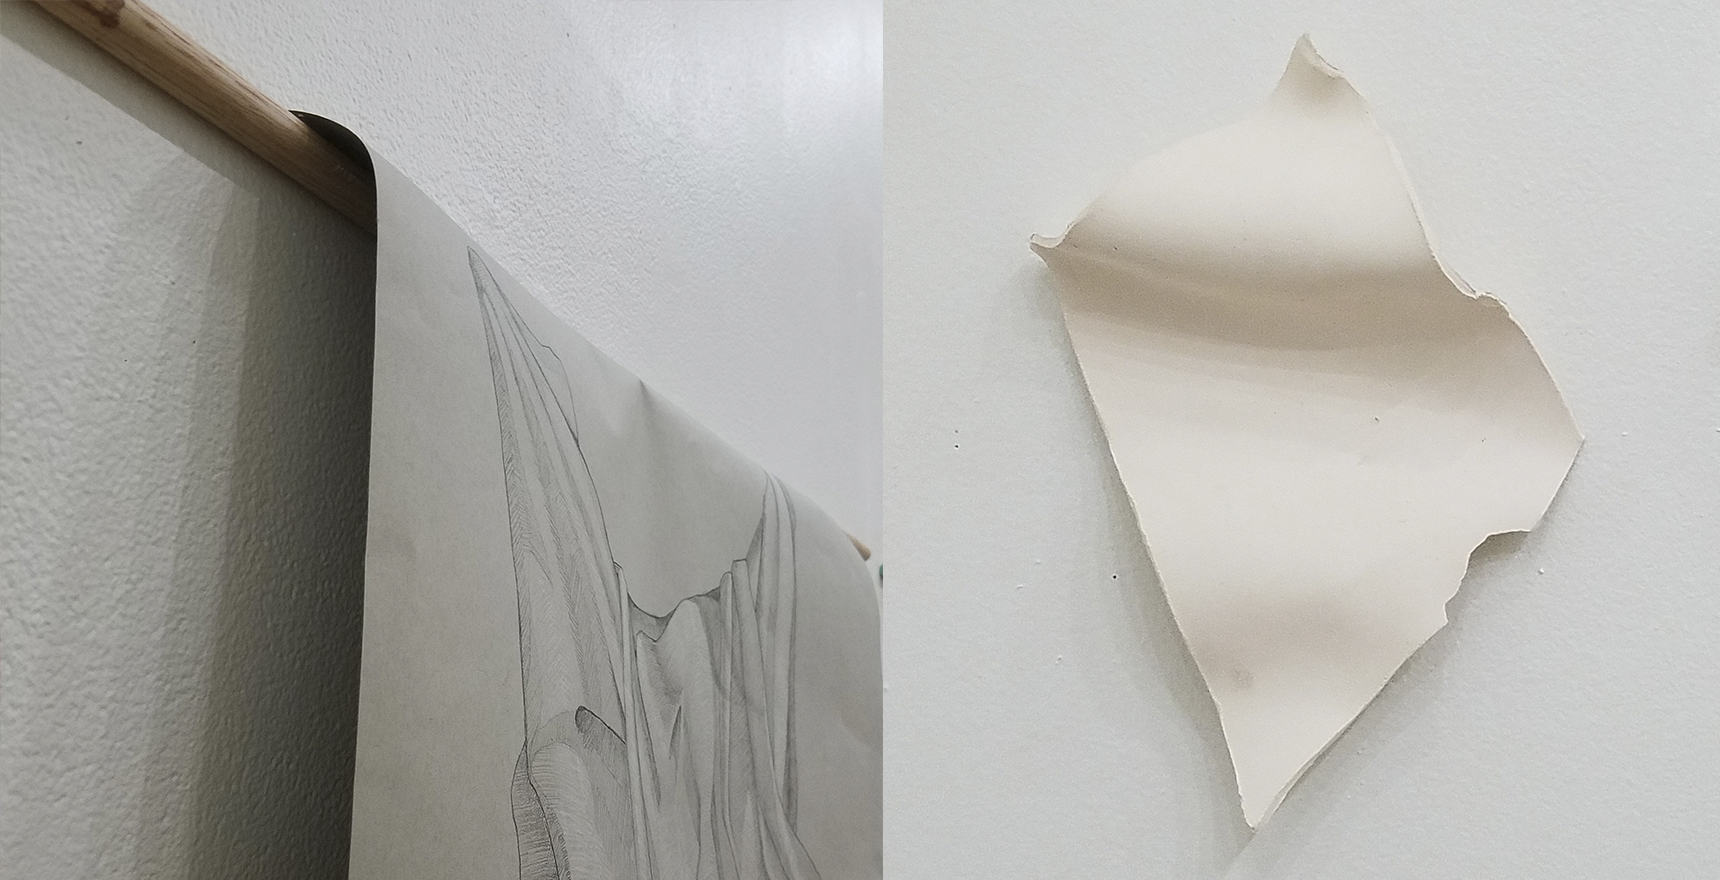 Photo of a drawing of a scrap of paper opposite a photo of a scrap of paper